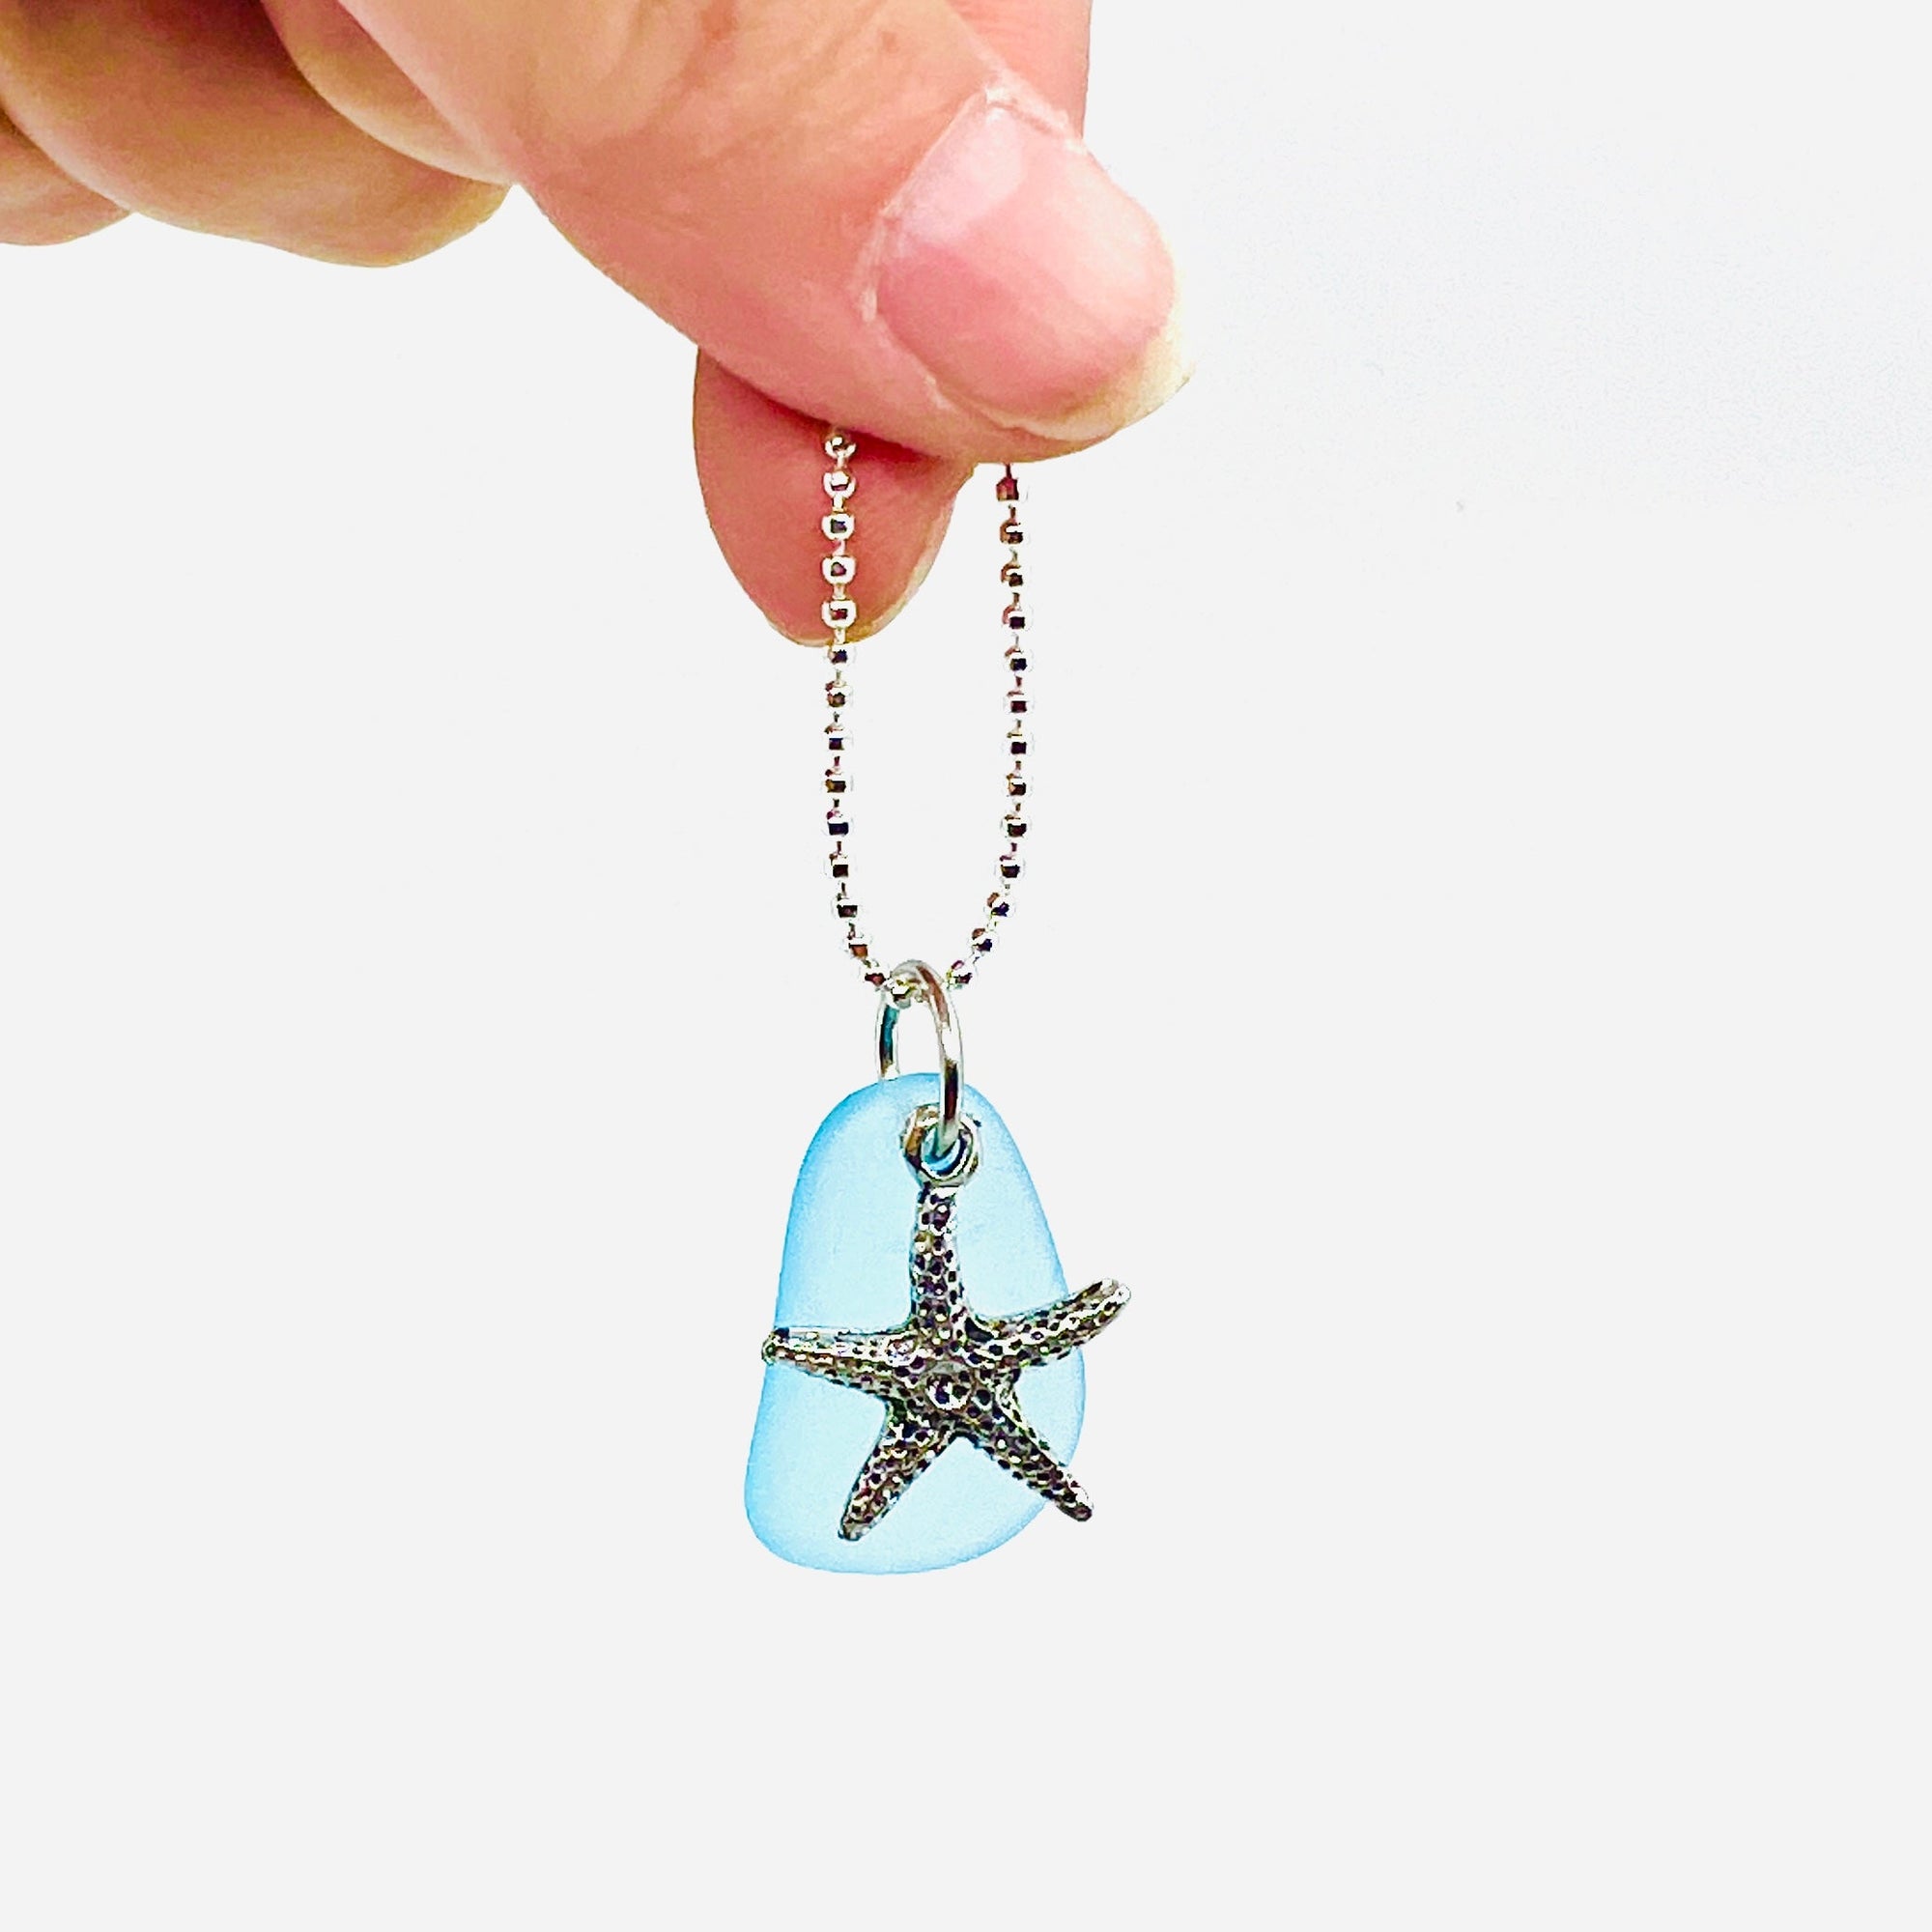 Pewter Starfish Pendant Necklace with Sea glass Jewelry Whitney Howard Designs 